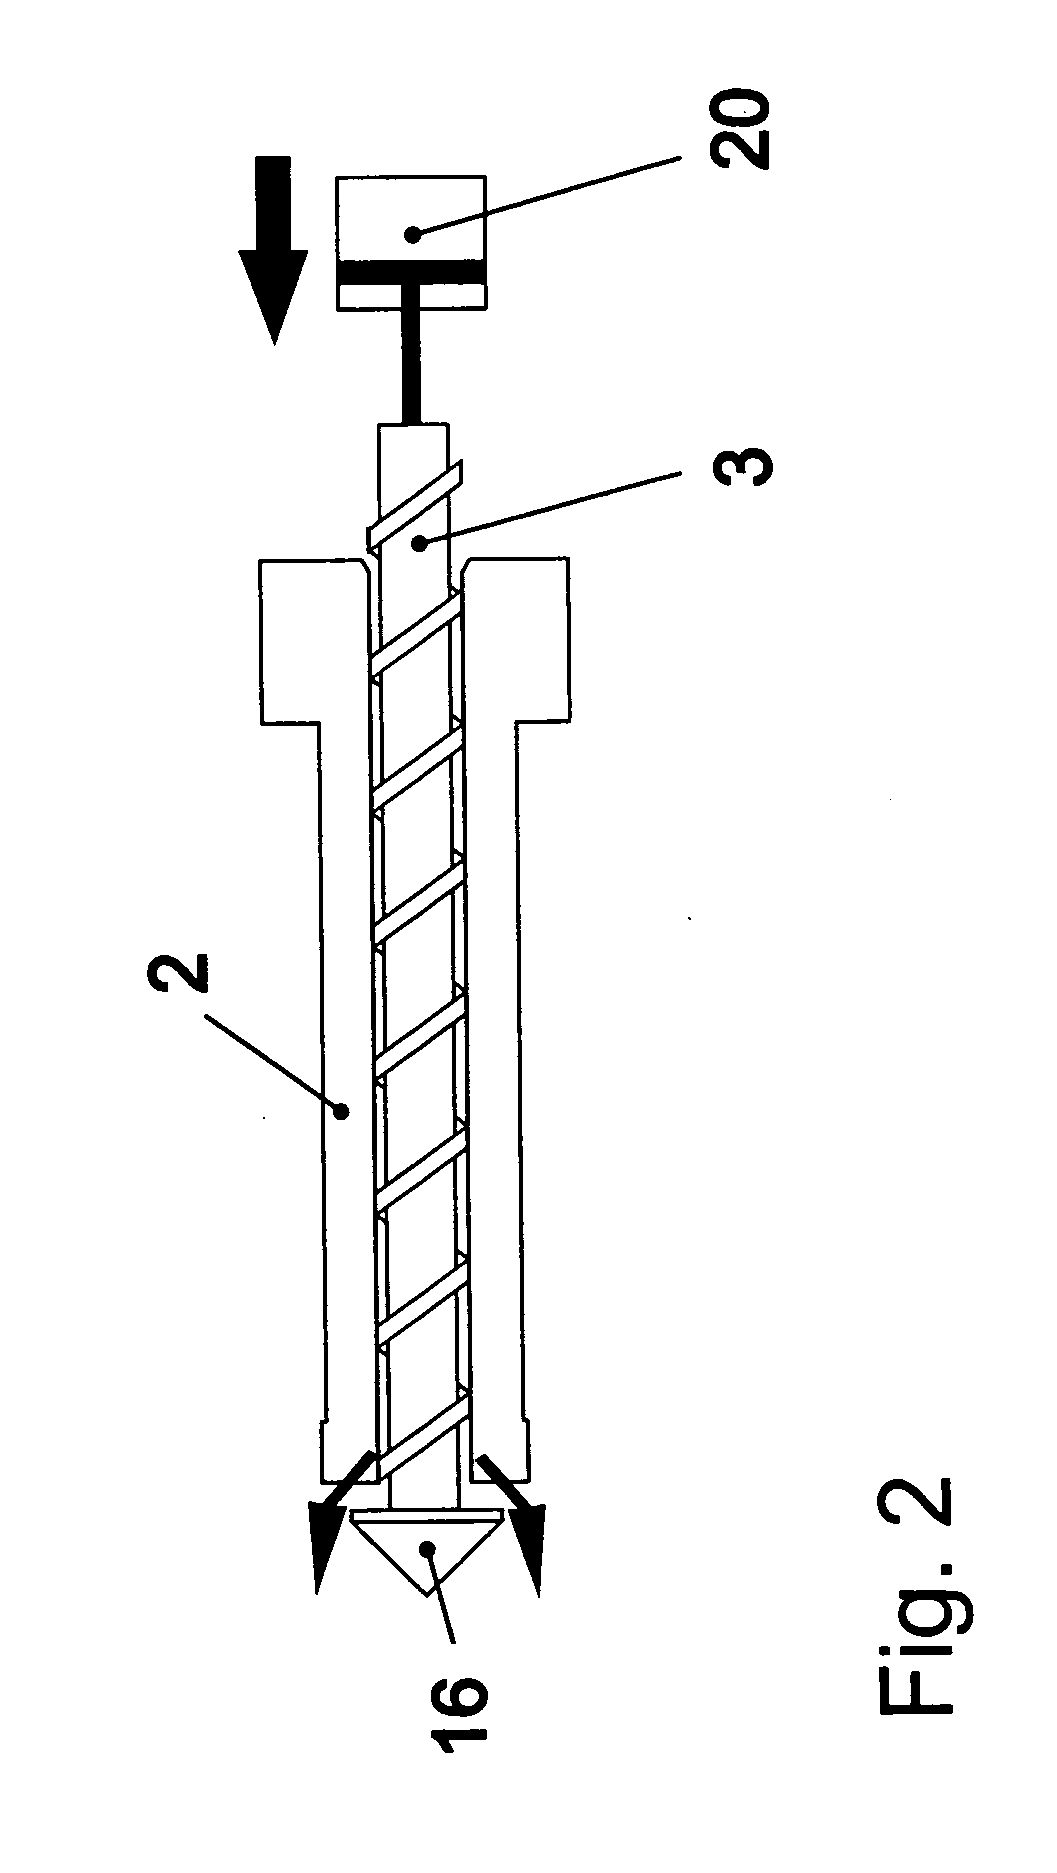 Plastification and injection unit with back-flow barrier